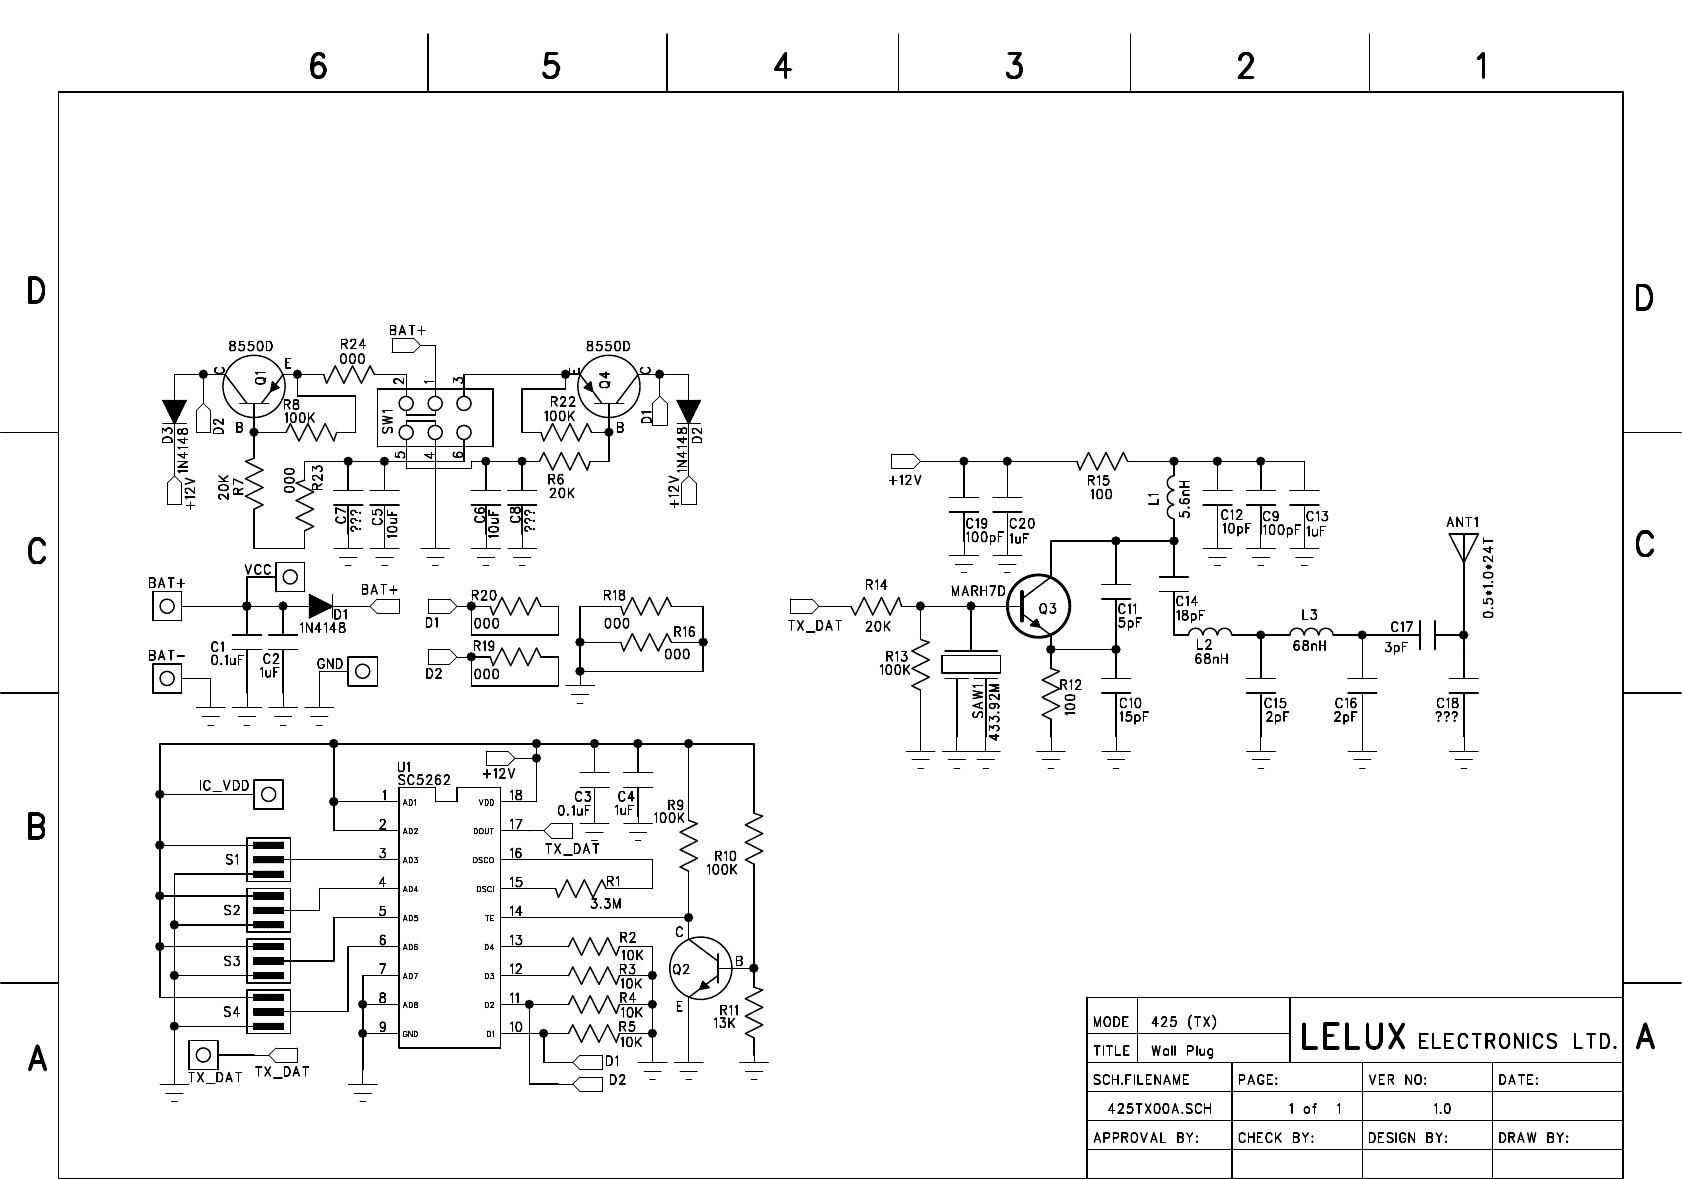 Light Switch Picture Lovely 425t Wireless Light Switch Schematics Wptx00a Lelux Electronics Ltd Light Switch